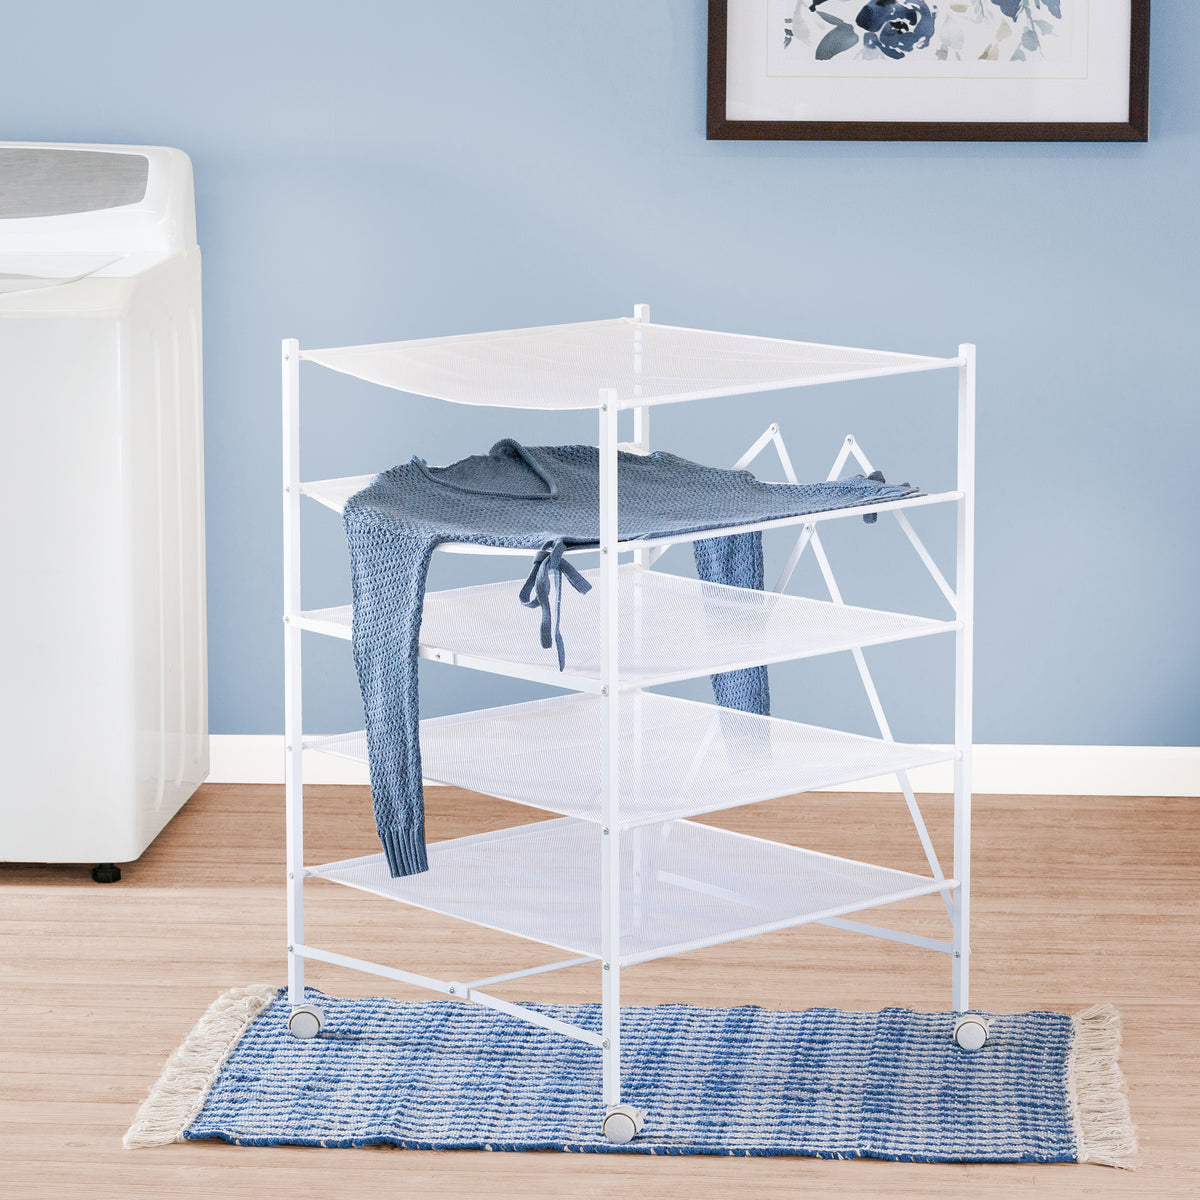 Collapsible Clothes Drying Rack | Honey-Can-Do